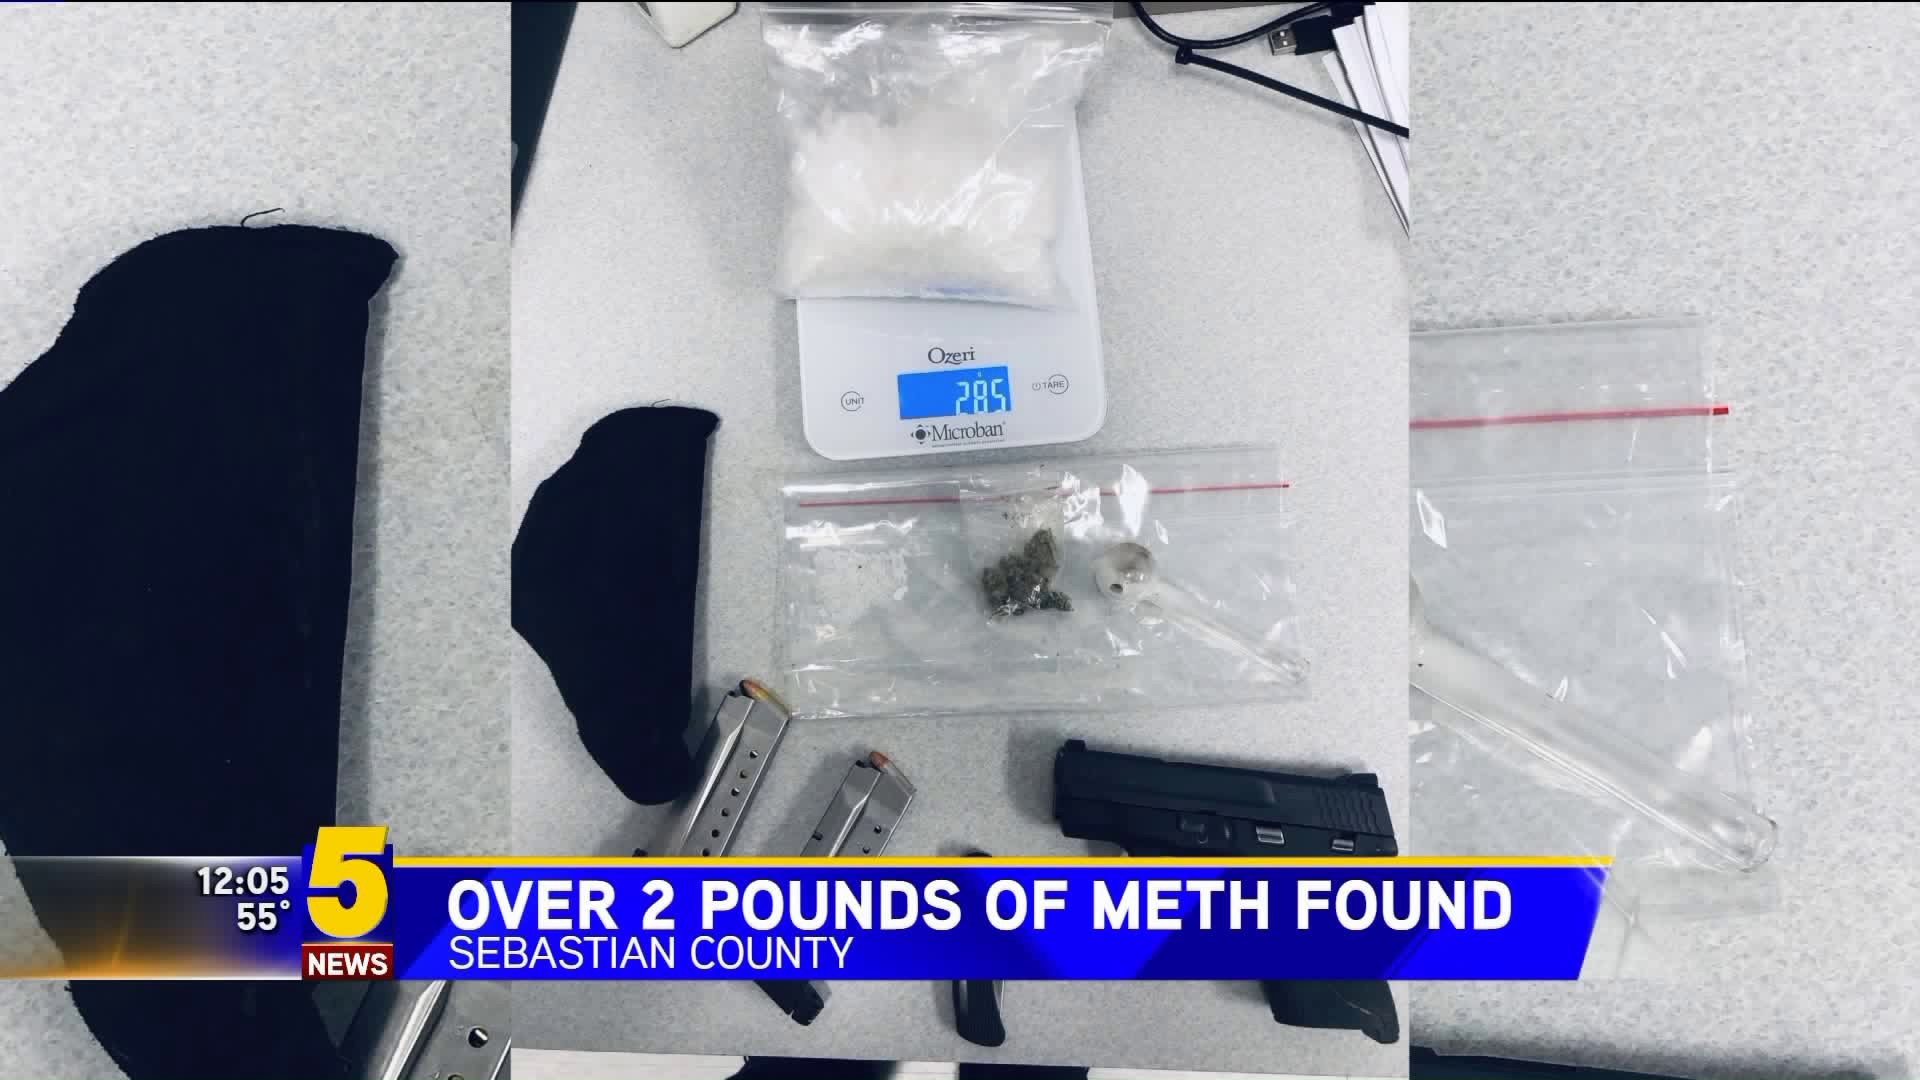 Over 2 Pounds Of Meth Found In Sebastian County